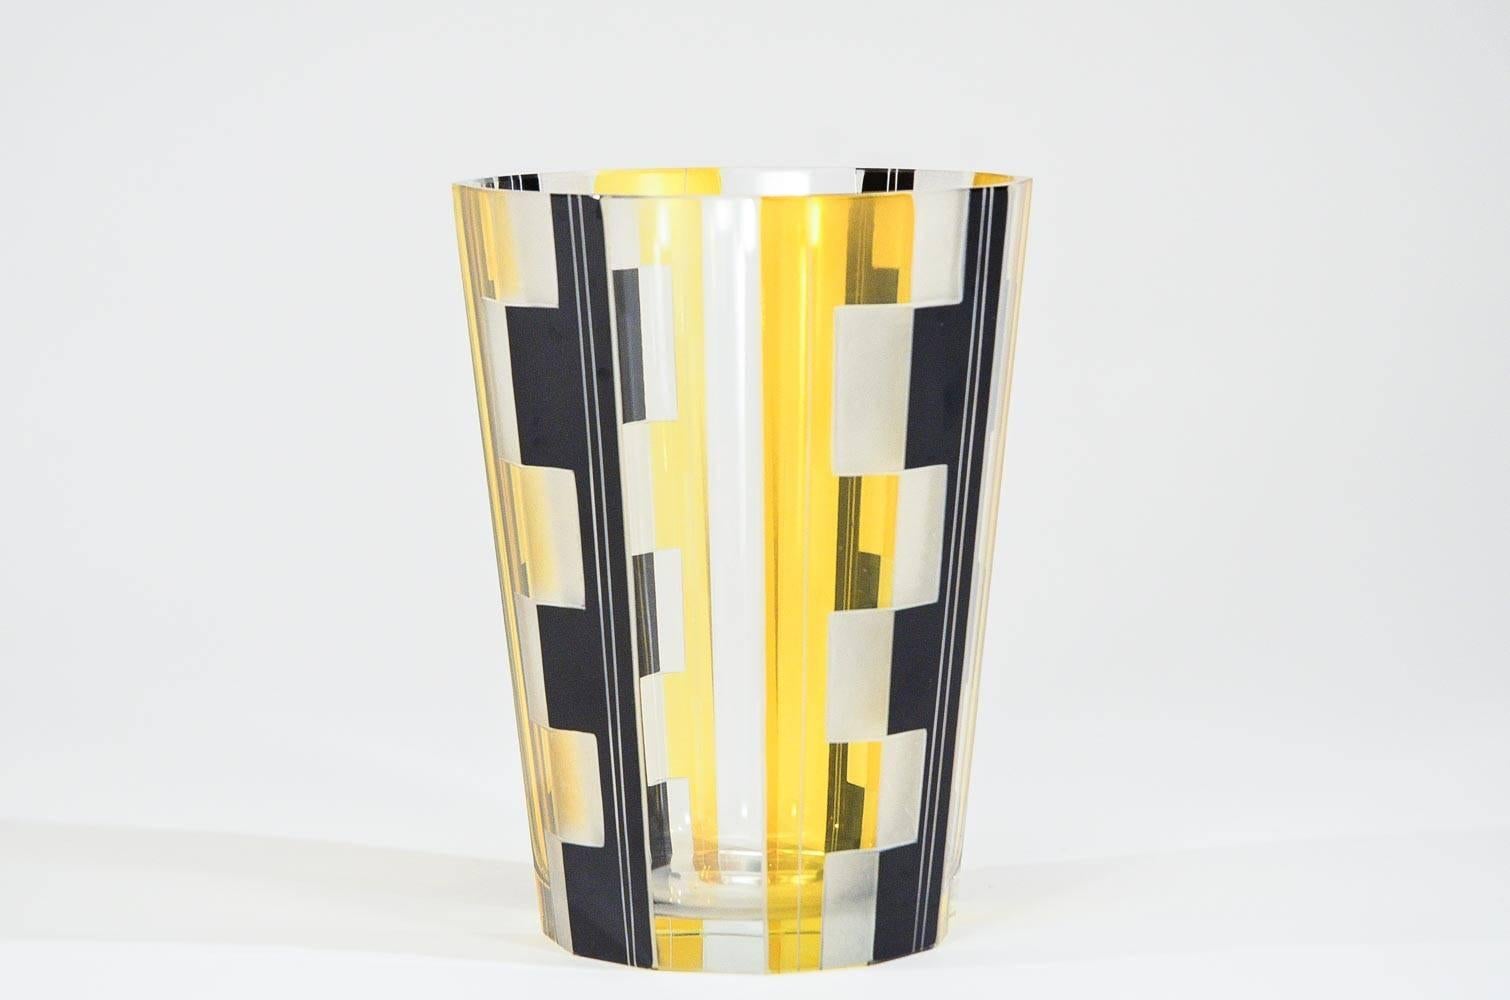 This classic example of Art Deco glass that was prominent and popular in the 1910-1920's is both functional and decorative. The combination of clear, vibrant sunflower yellow and black creates the visual end product. It is panel cut with 12